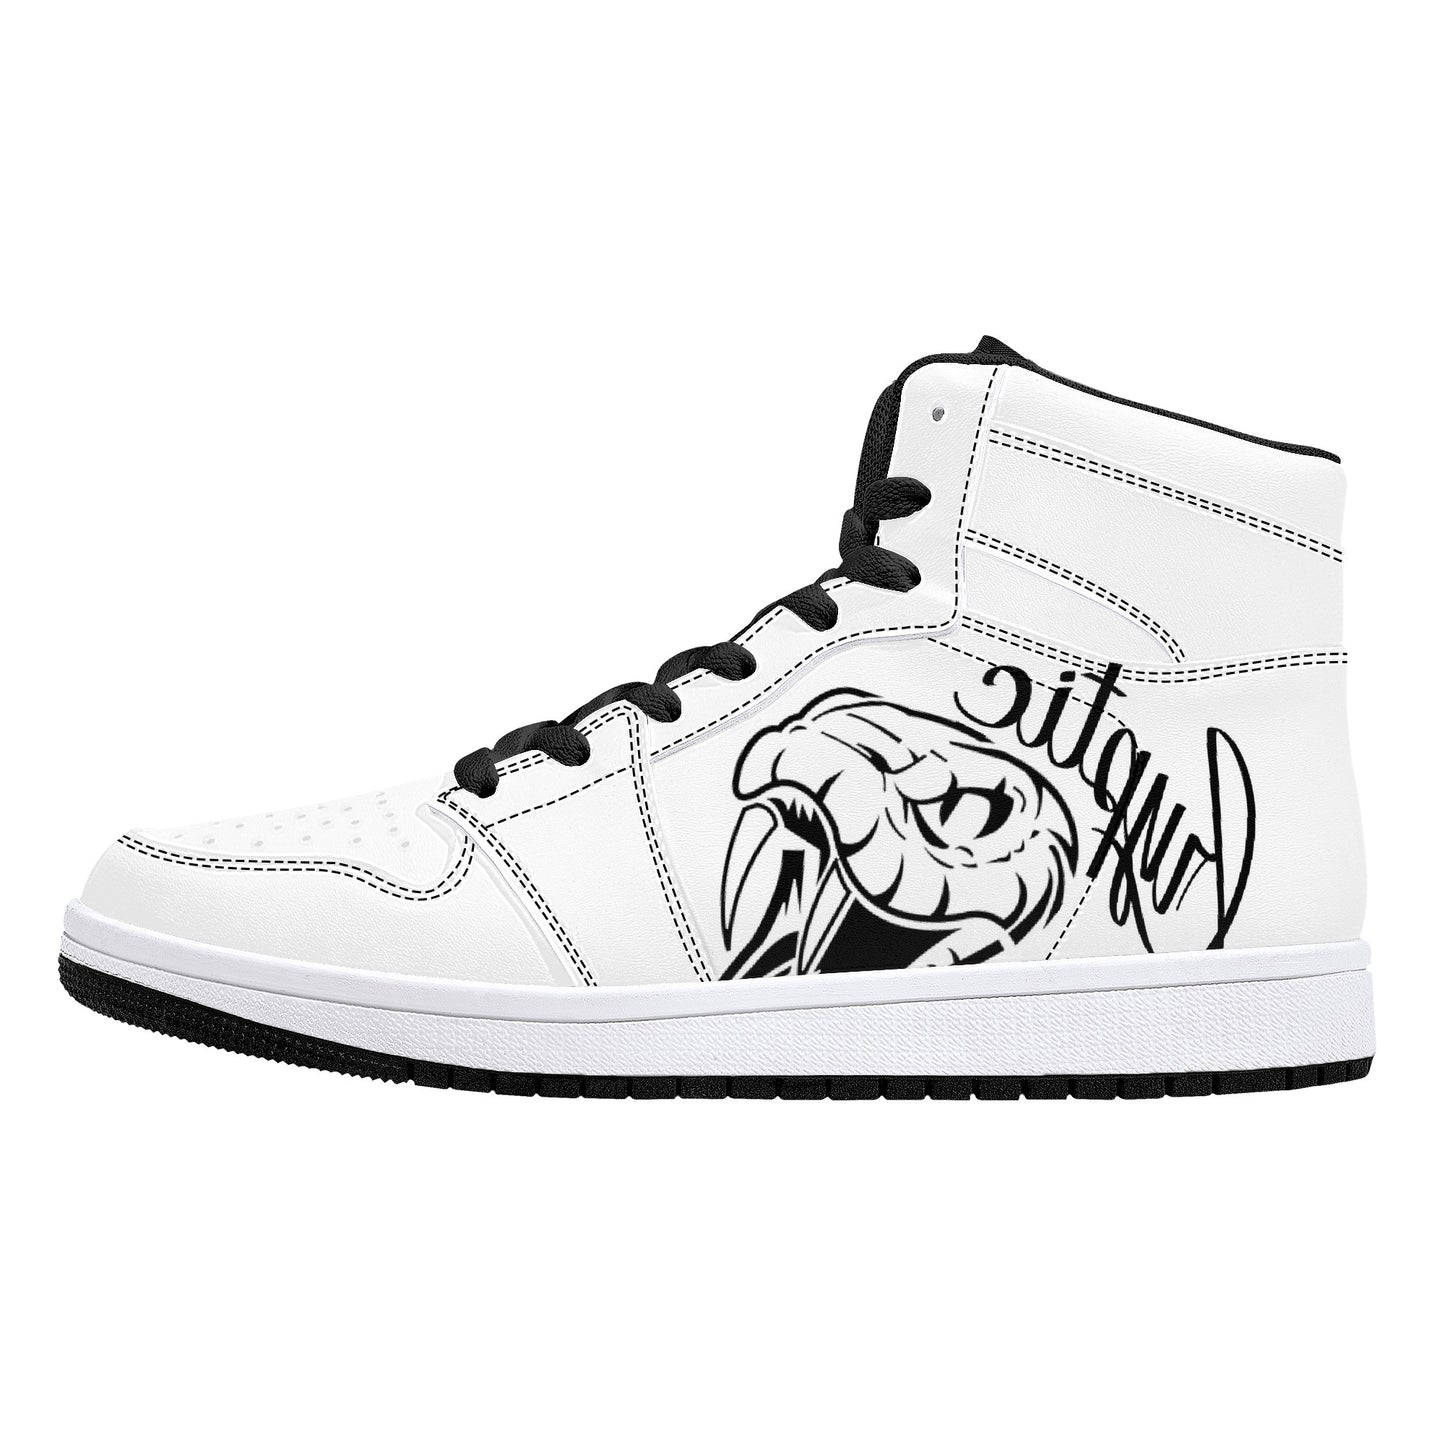 Cryptic High-Top Synthetic Leather Sneakers, White